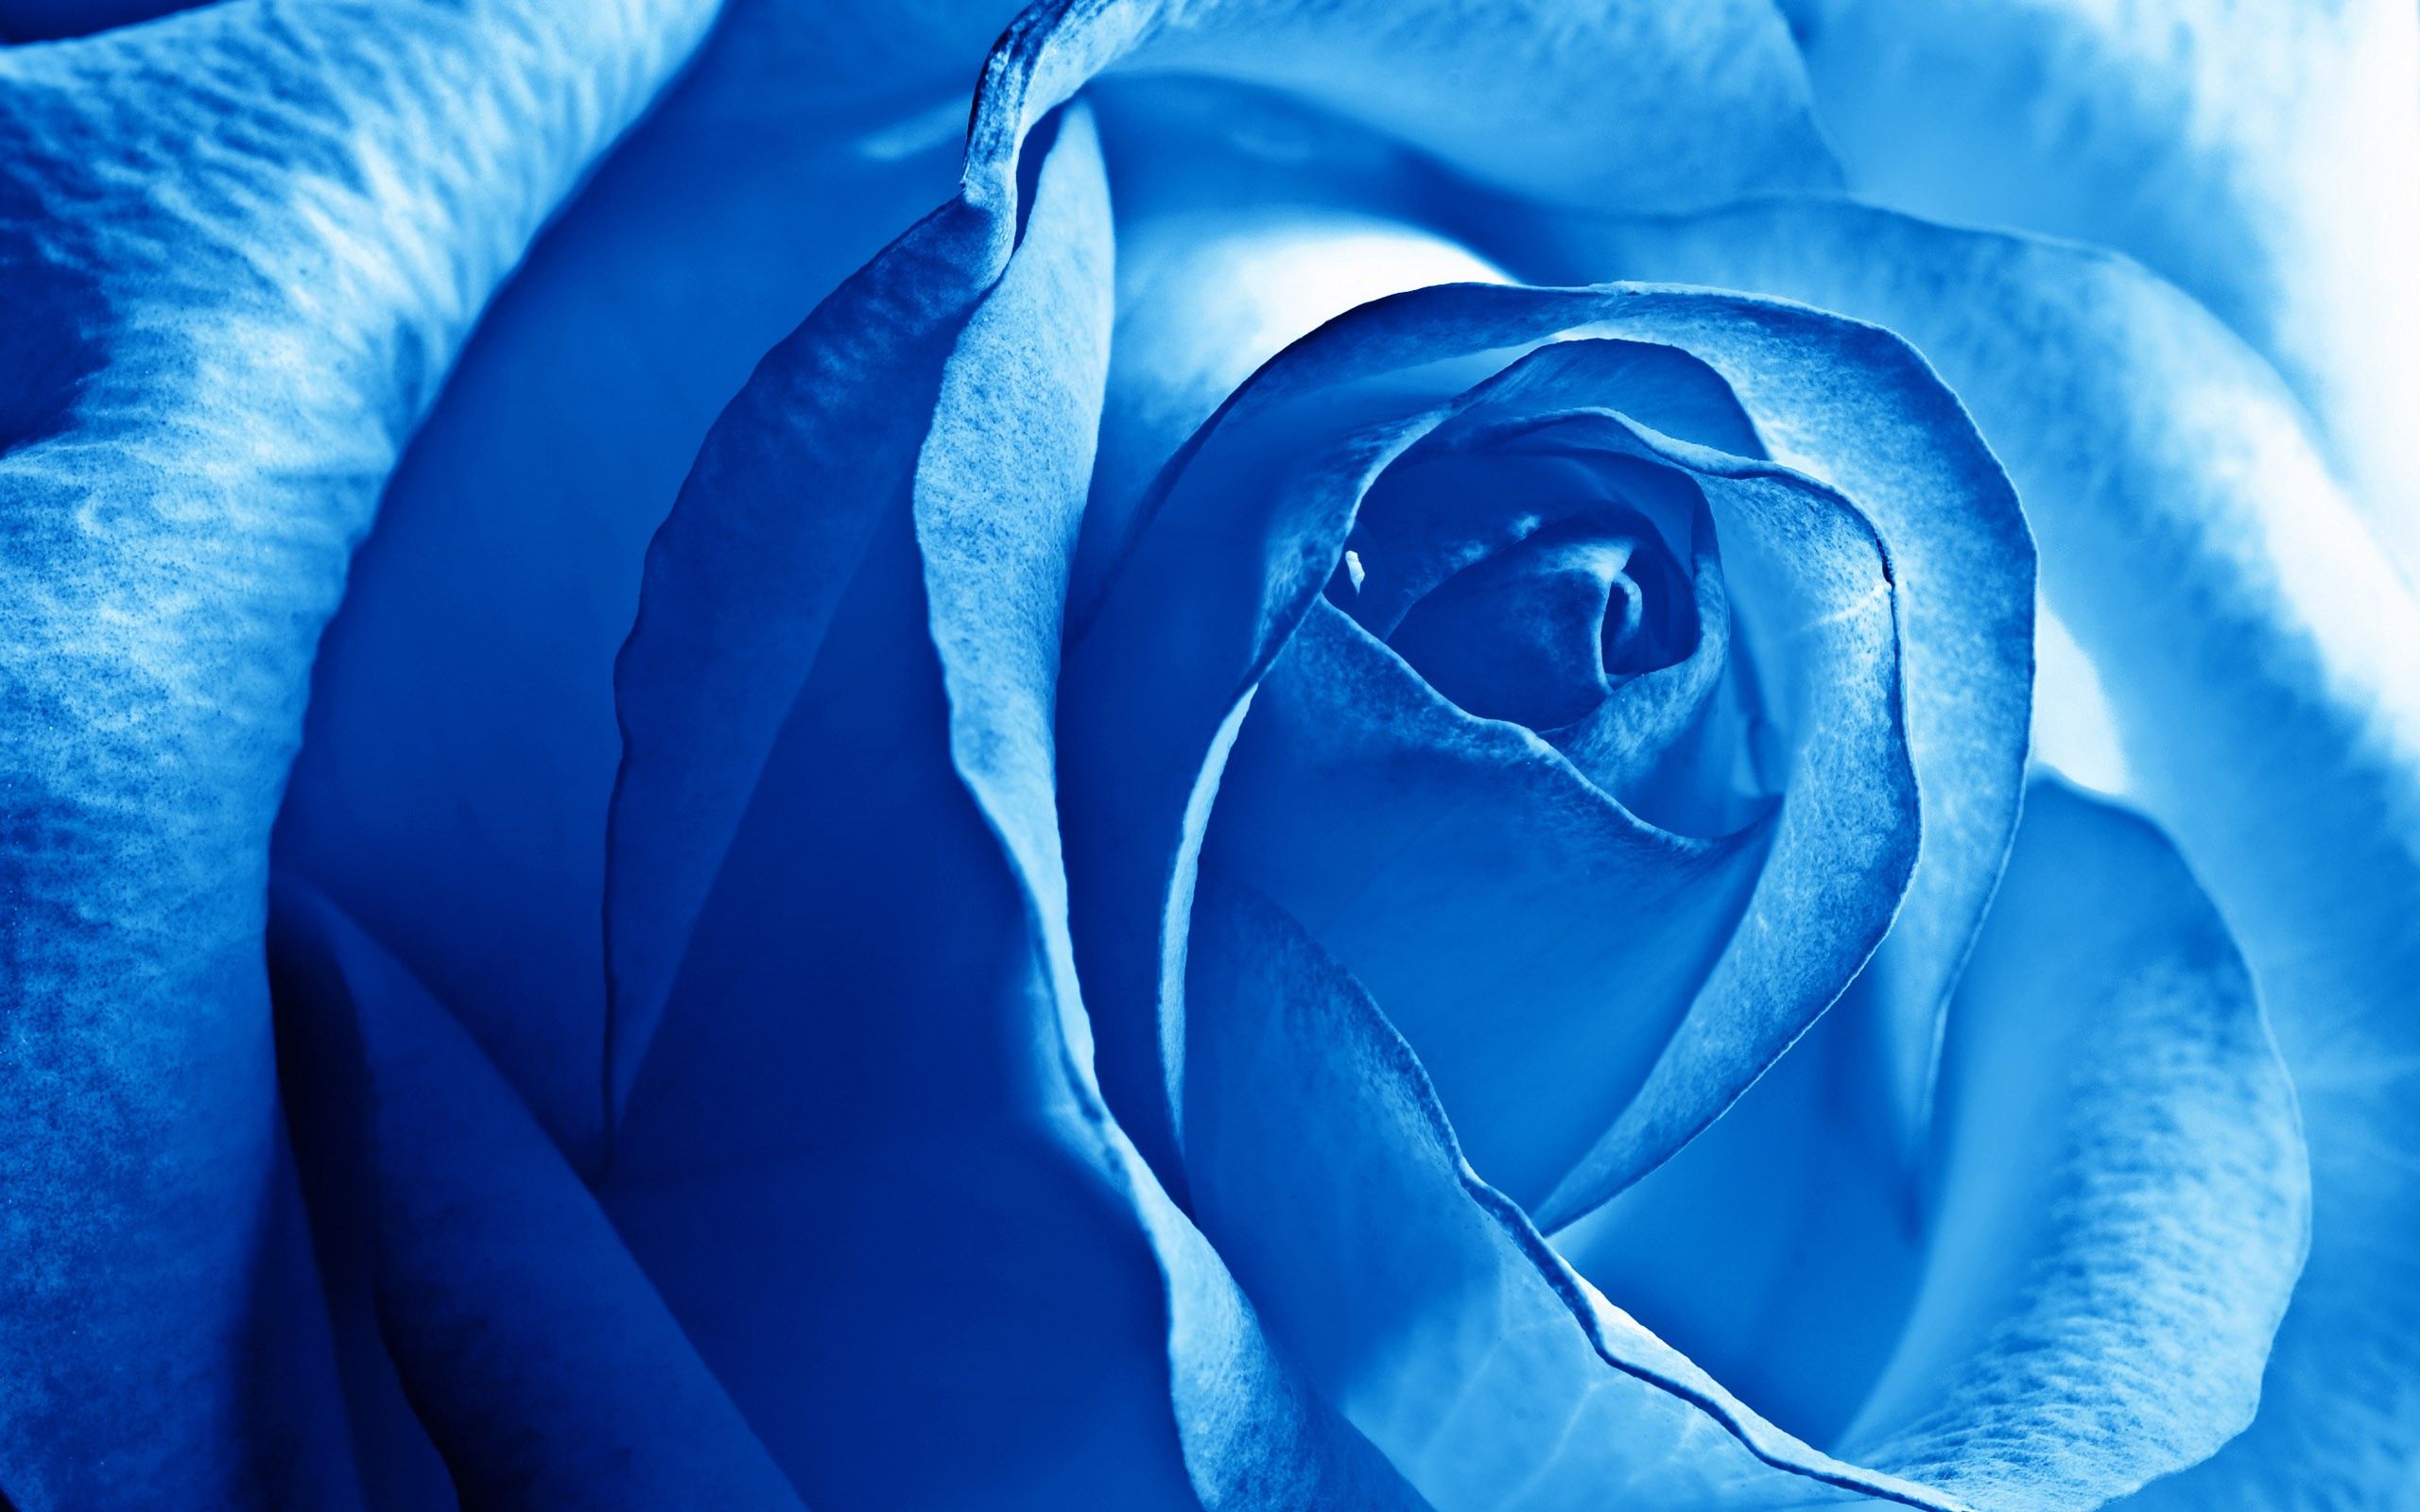 Free Wallpaper Blue Rose Wide Download High Definiton Wallpaper Windows 10 Background 4k Hi Res Quality Image Best Colours Artwork 2560x1600. Full HD Wallpaper